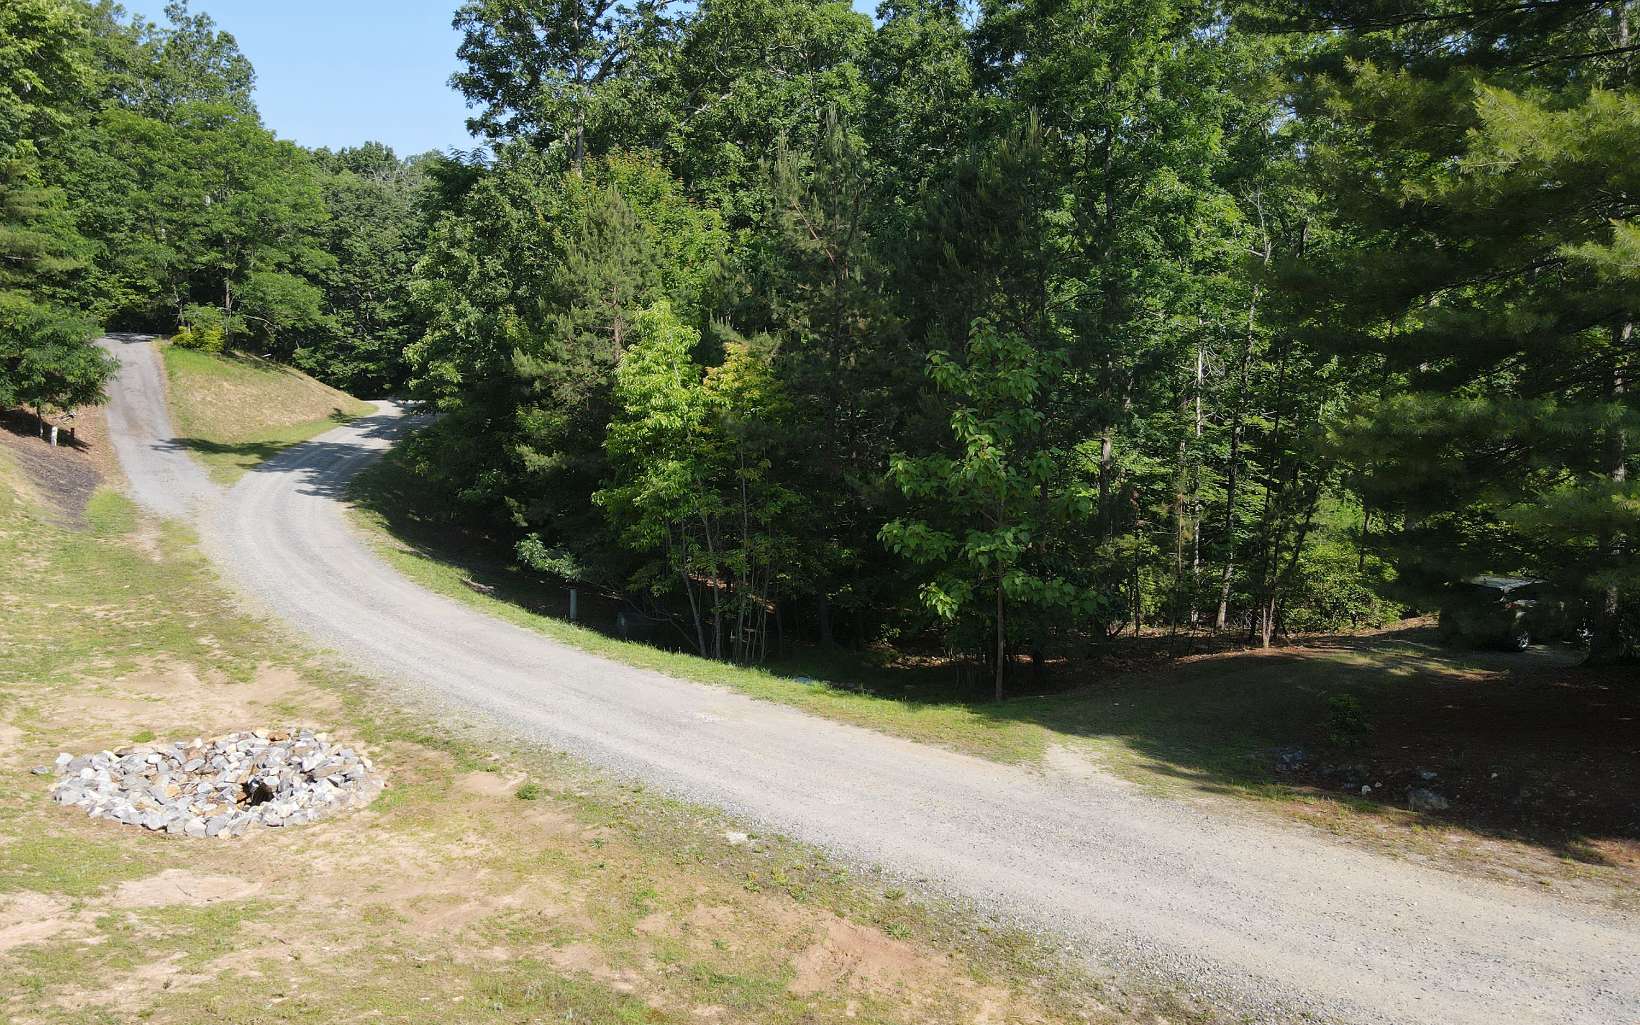 GREAT LOCATION Just minutes from Hwy 515 centrally located between Blue Ridge and Blairsville. Bring your builder and start making your mountain dream come true. This lot has a gentle slope and leads down to a shared pond. Take advantage of all that the area offers: Lake Blue Ridge, Lake Nottely, the Toccoa River, numerous hiking trails, and even Mercier’s Orchards. Don’t miss this great opportunity to invest, build, and/or RENT in this quiet, gated community nestled in the North GA mountains! Short-term rentals are allowed.